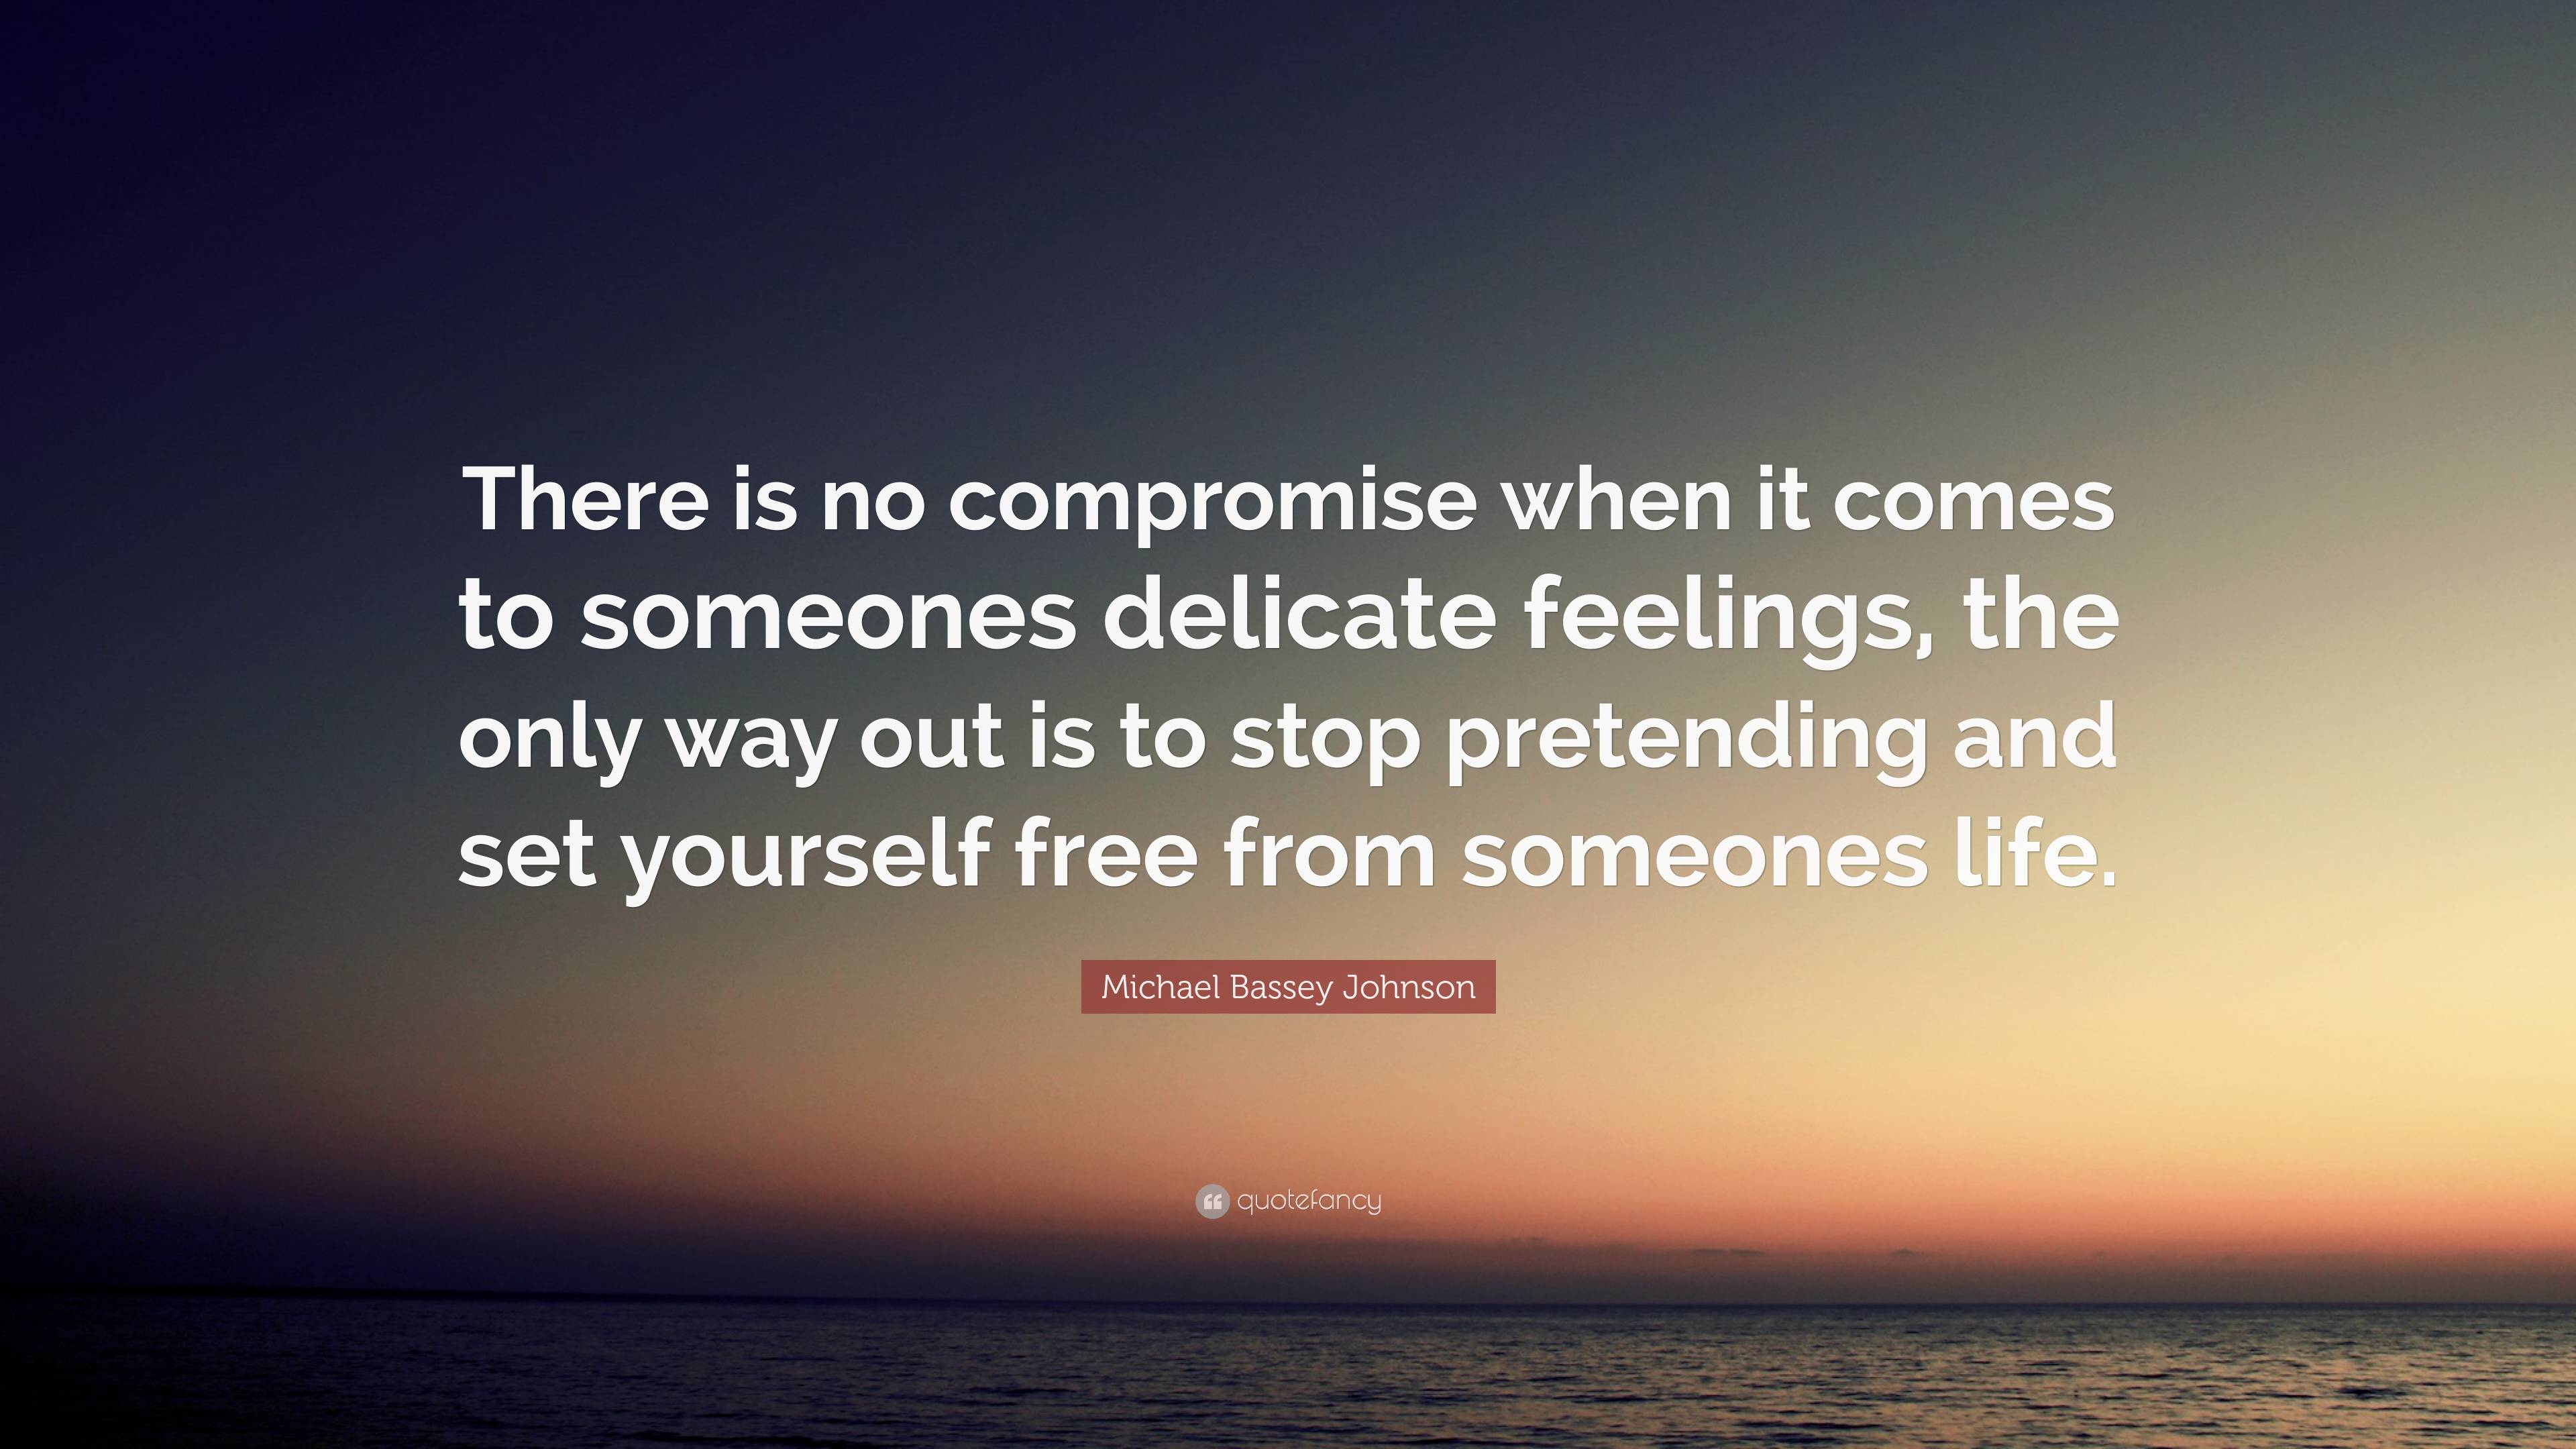 Going No Compromise means living it